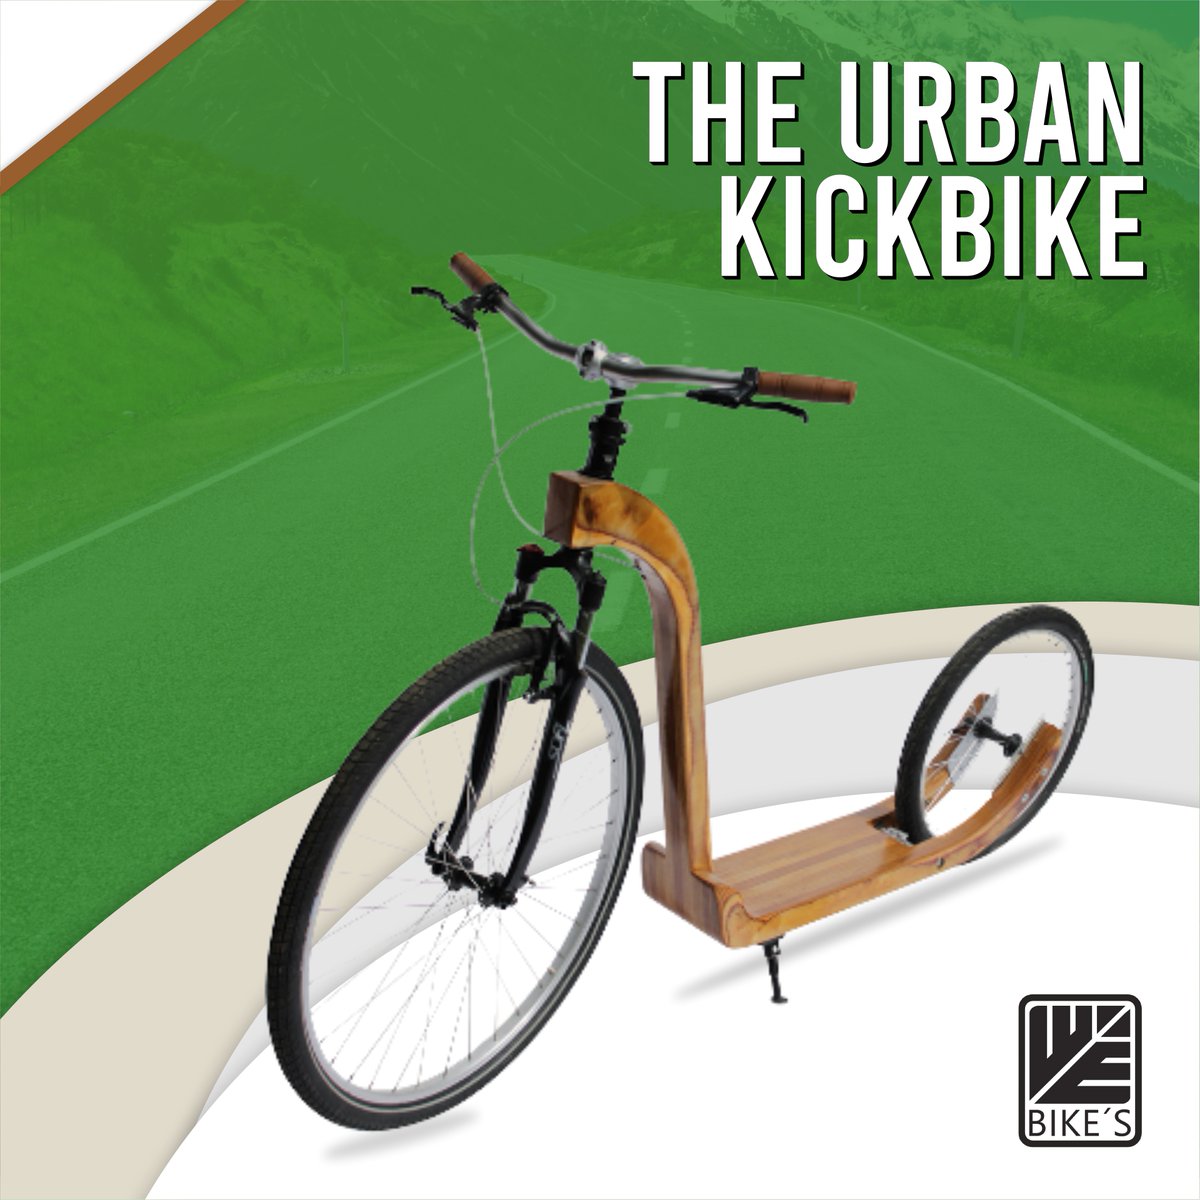 You know how you thought scooters were restricted to the pavement? It is no longer true! The urban kickbike shows that off-road scooting is awesomely fun, designed for battling through dirt and all.
-
🌐 wooden-kickbike.de

#woodenkickbikes #wooden #unique #handmade #webikes